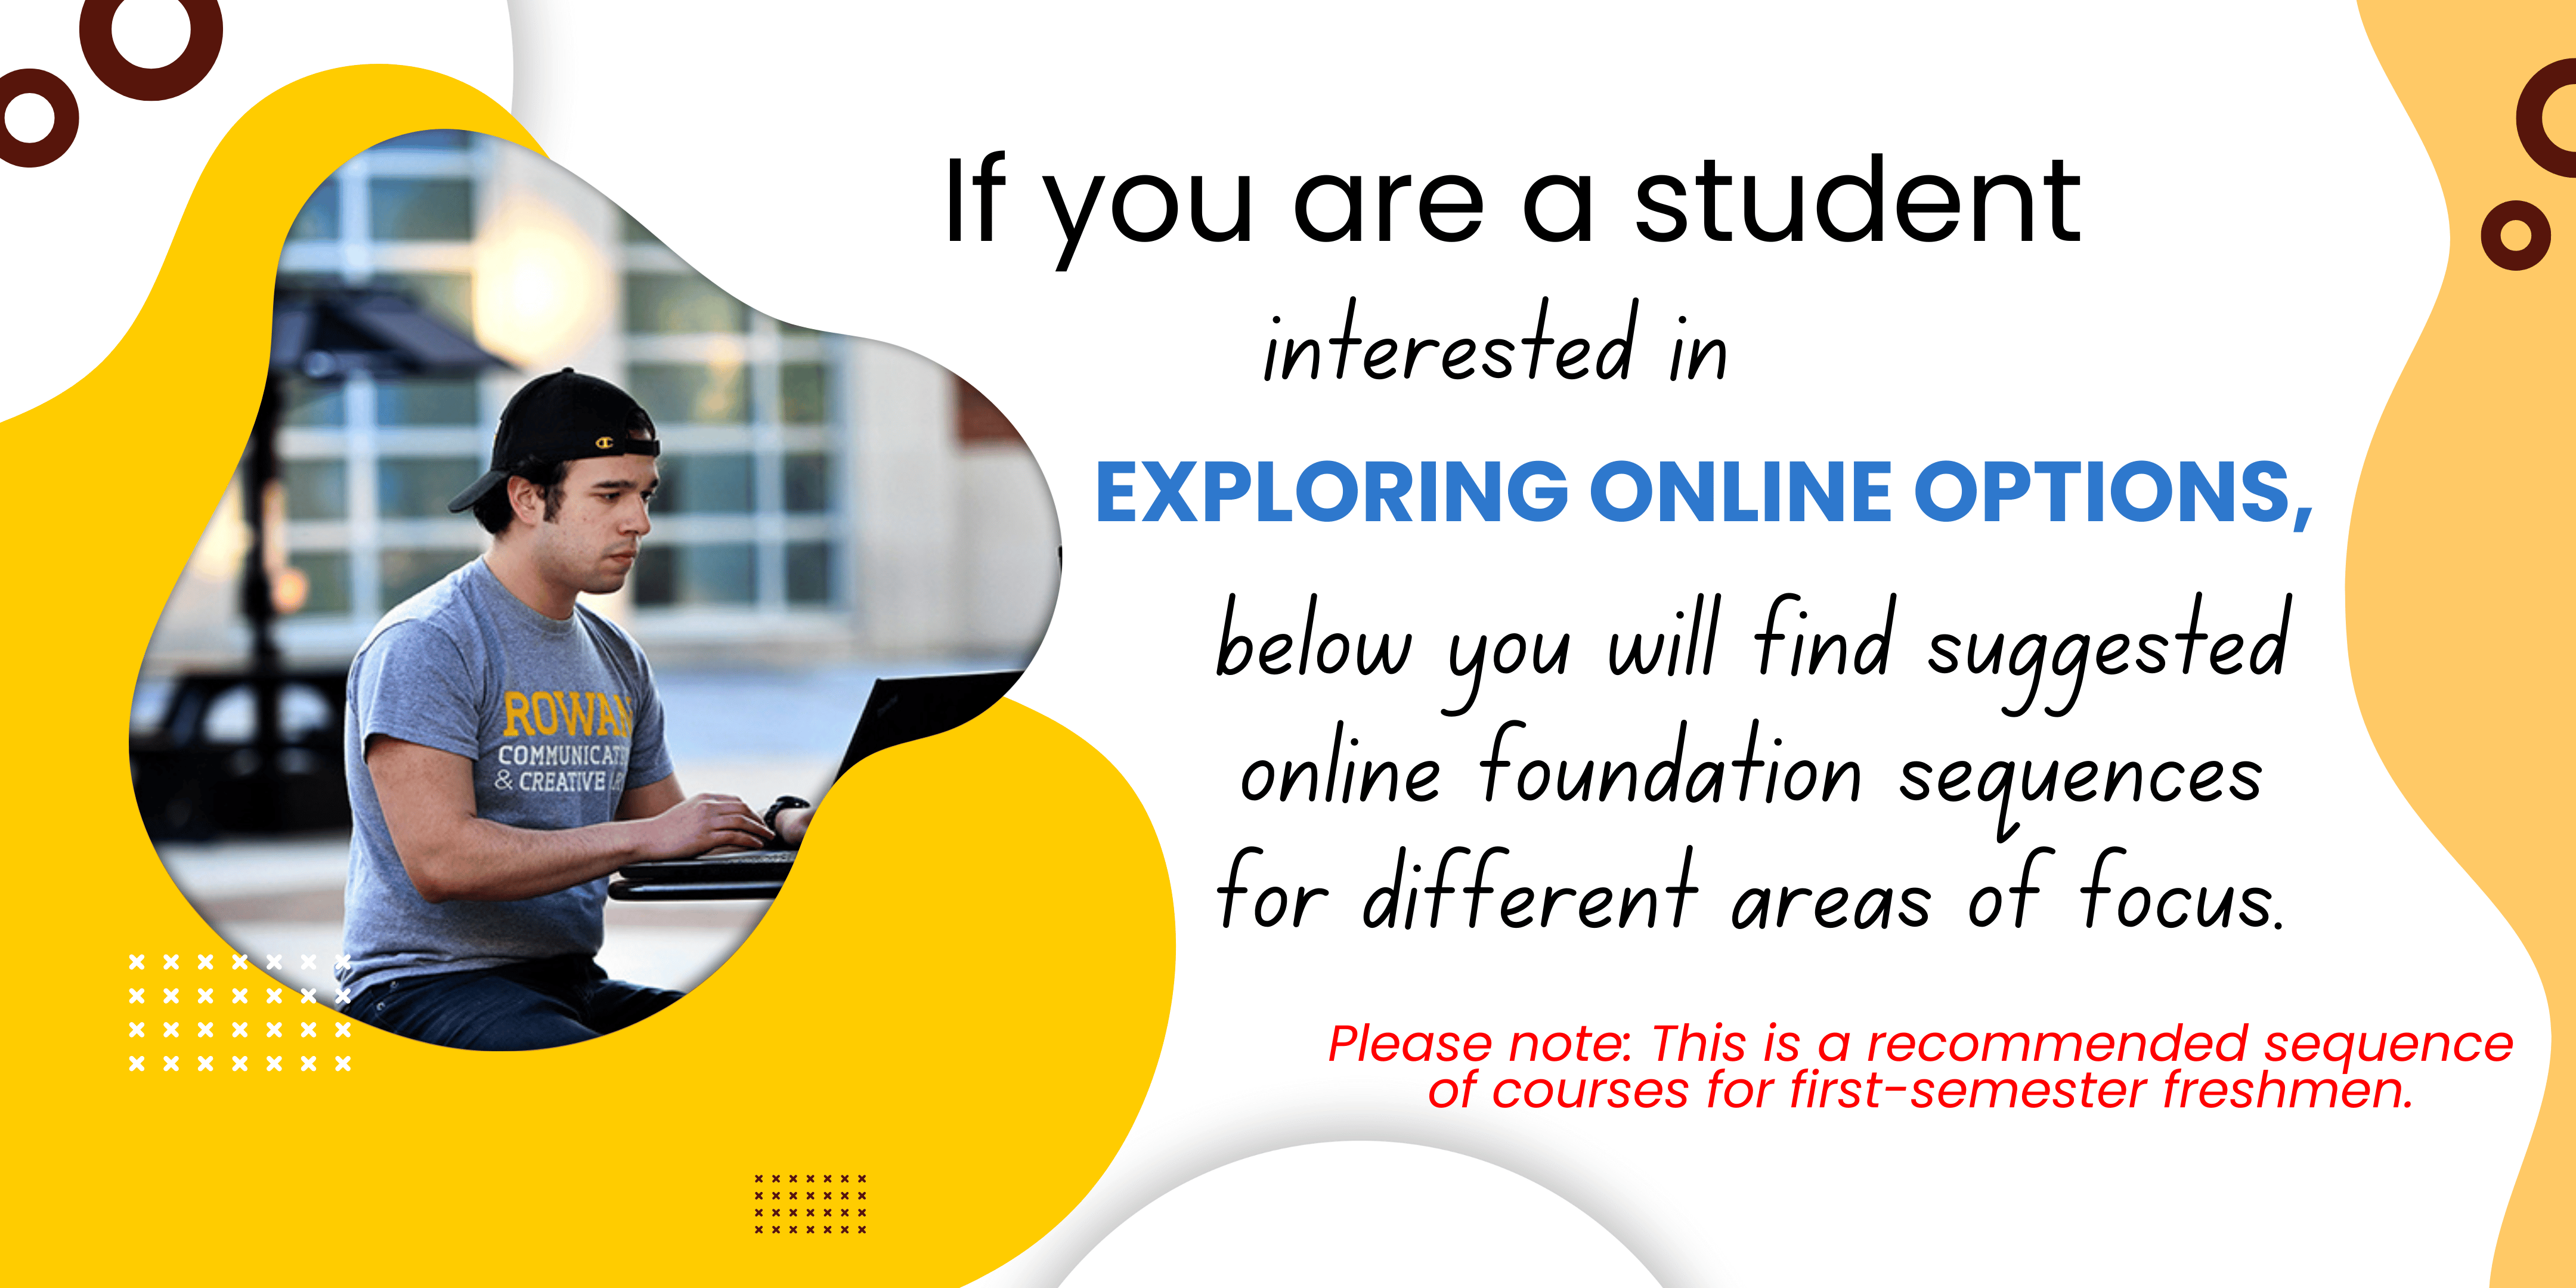 If you are a student exploring online options, below you will find suggested online foundation sequences for different areas of focus.